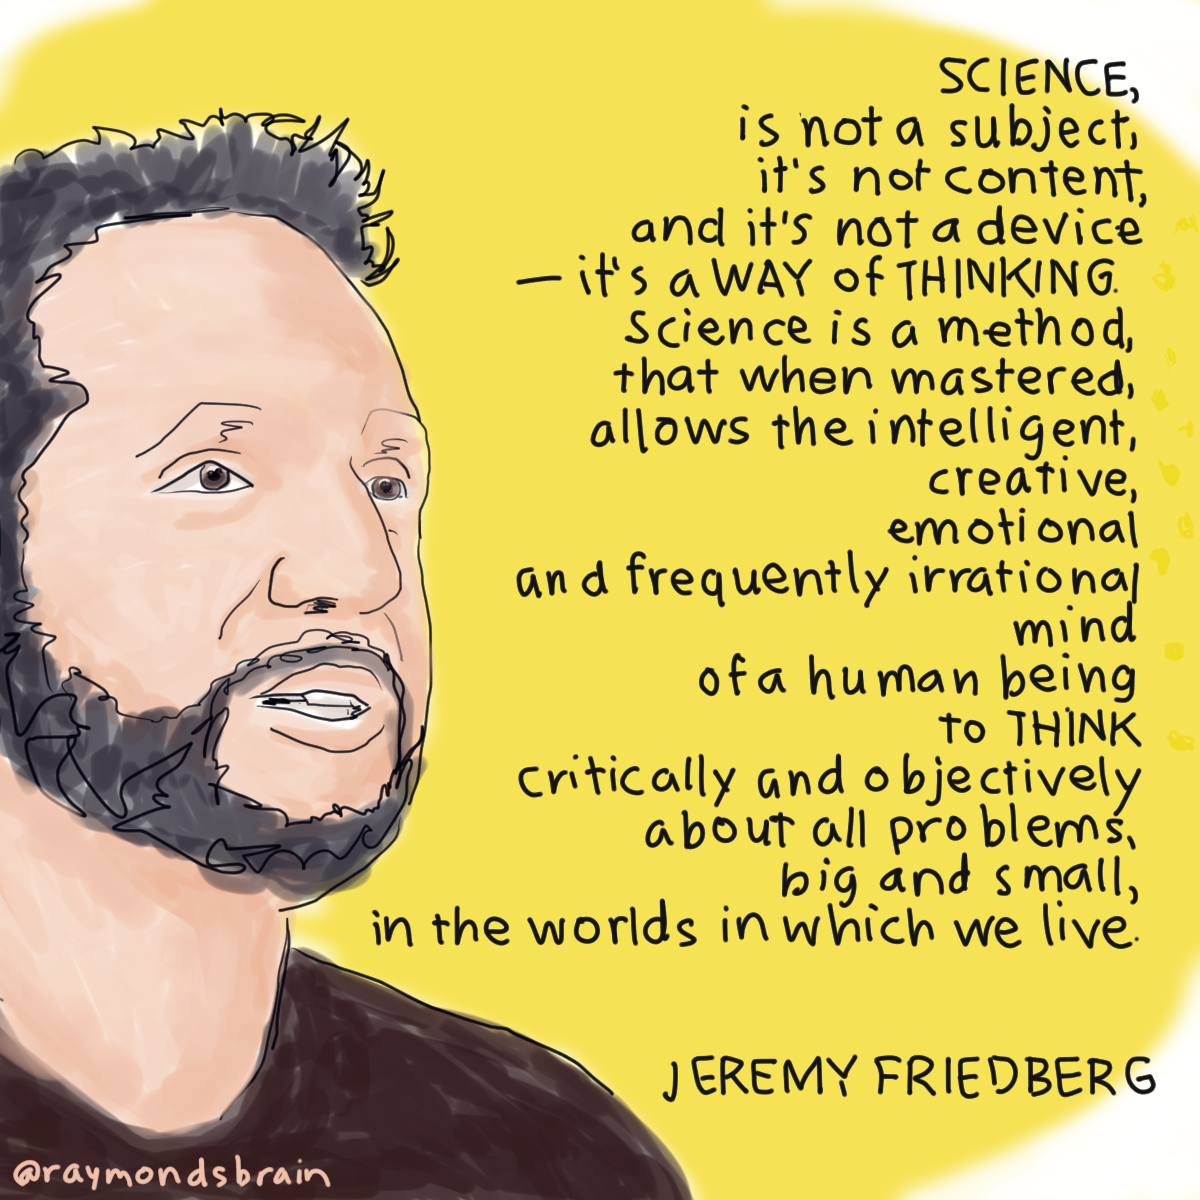 "Science, is not a subject, it’s not content and it’s not a device â€“ it’s a way of thinking. Science is a method, that when mastered, allows the intelligent, creative, emotional and frequently irrational mind of a human being to think critically and objectively about all problems, big and small, in the worlds in which we live." - <a href="http://www.jeremyfriedberg.com/index.html">Jeremy Friedberg</a>, scientist, educator, educational game designer. Originally posted on September 13, 2016.